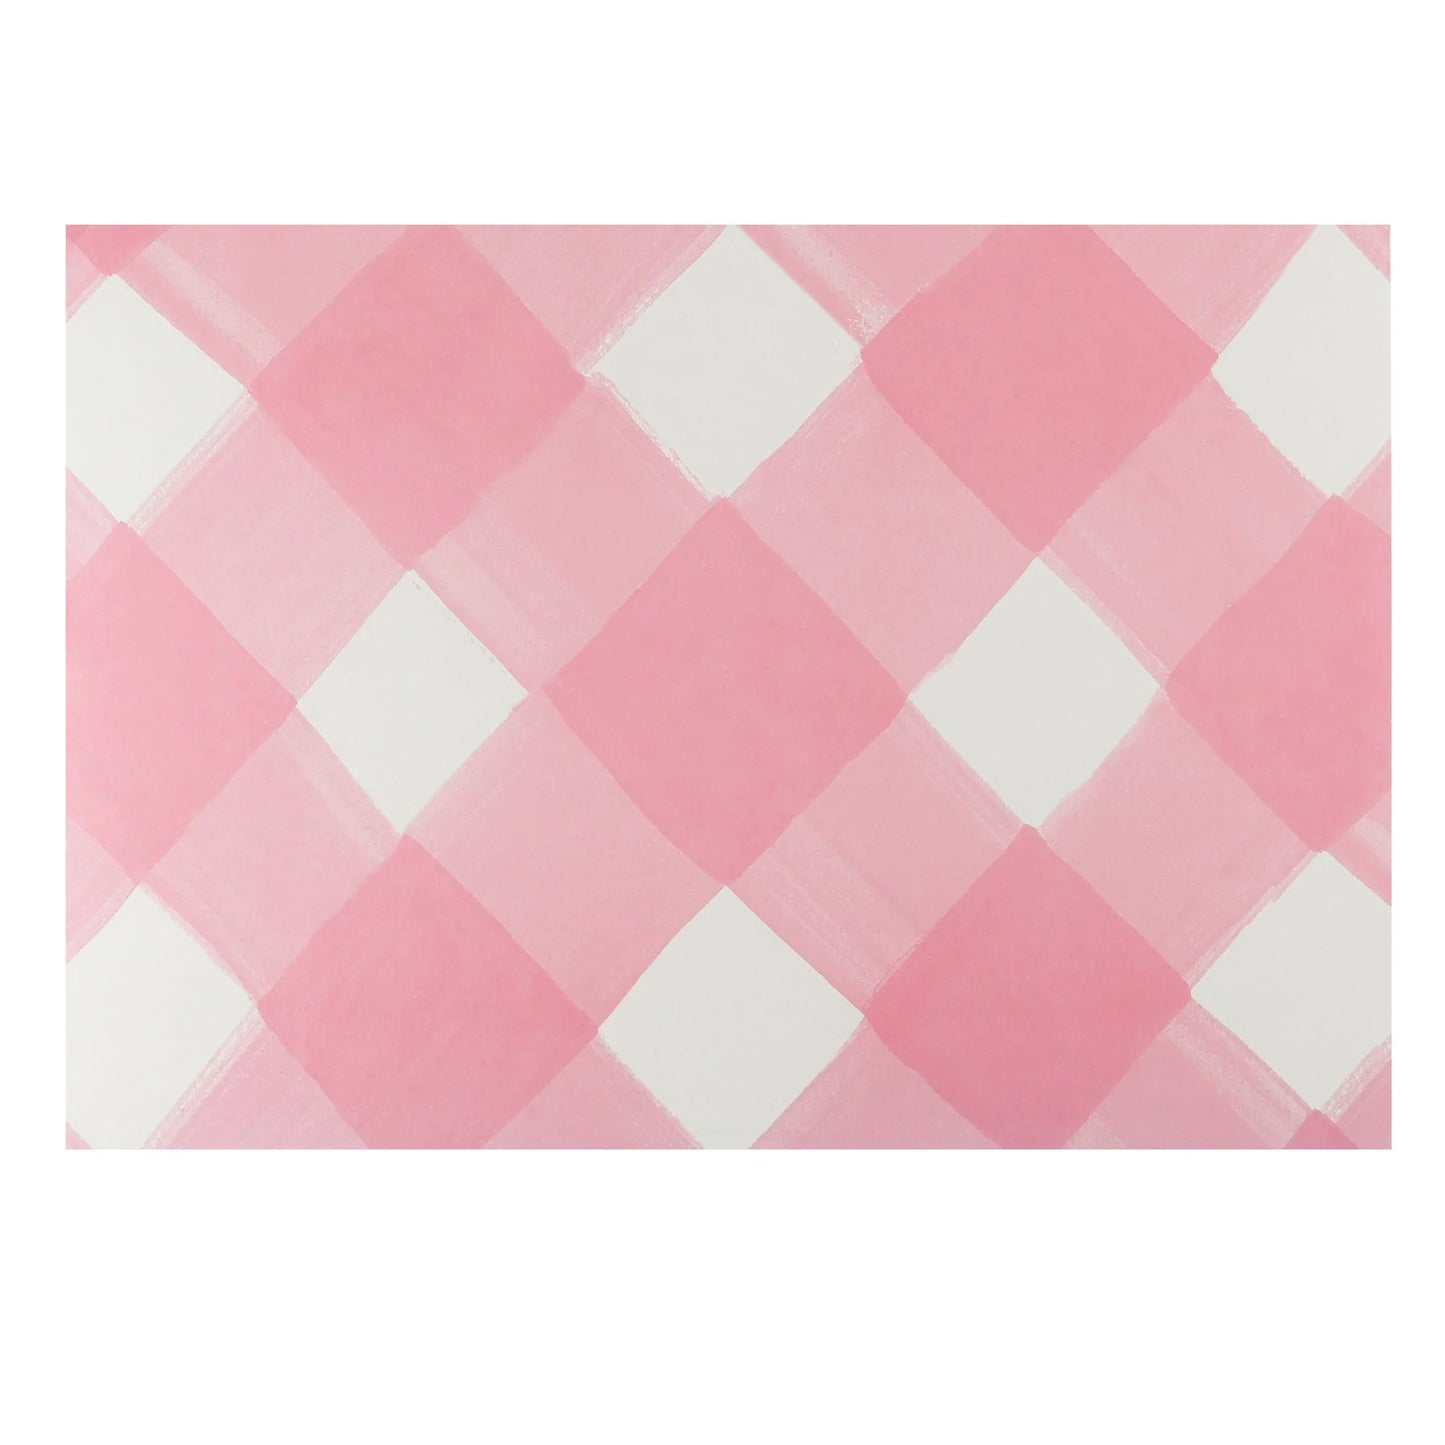 Deck the Halls, Y'all Paper Placemats: Pink Gingham